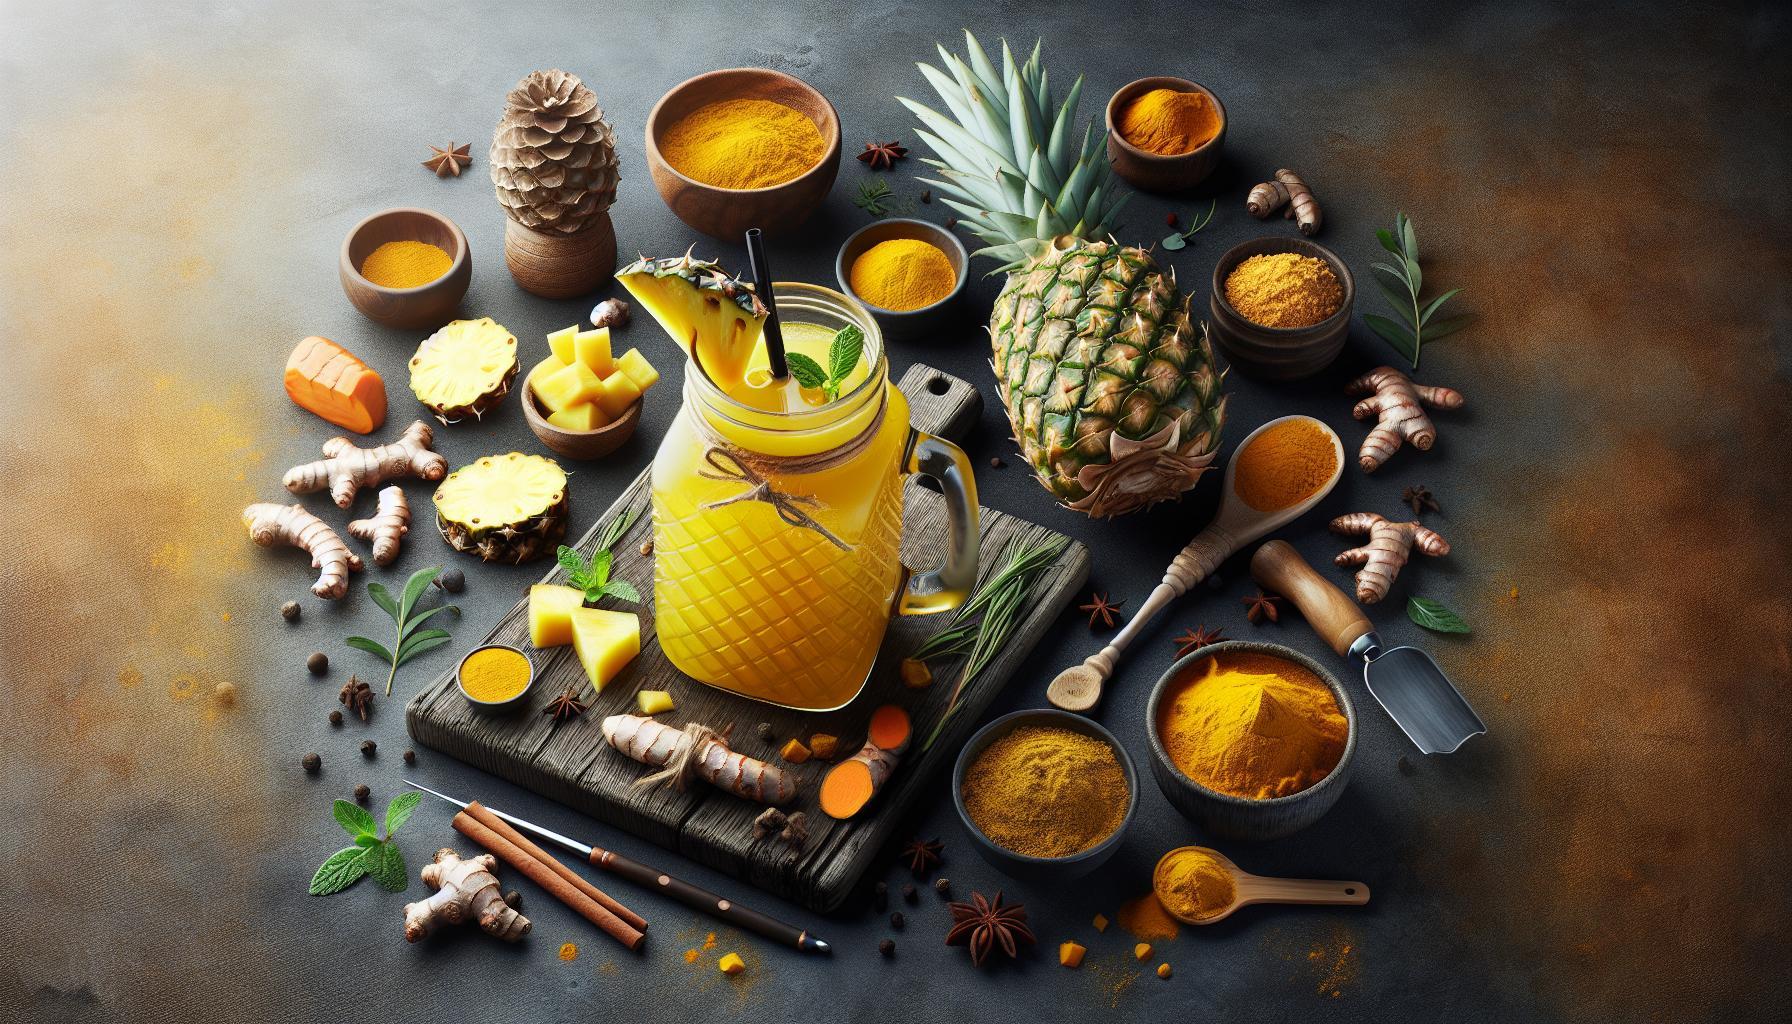 Boost Your Health with Our Energizing Pineapple Turmeric Recovery Drink Recipe